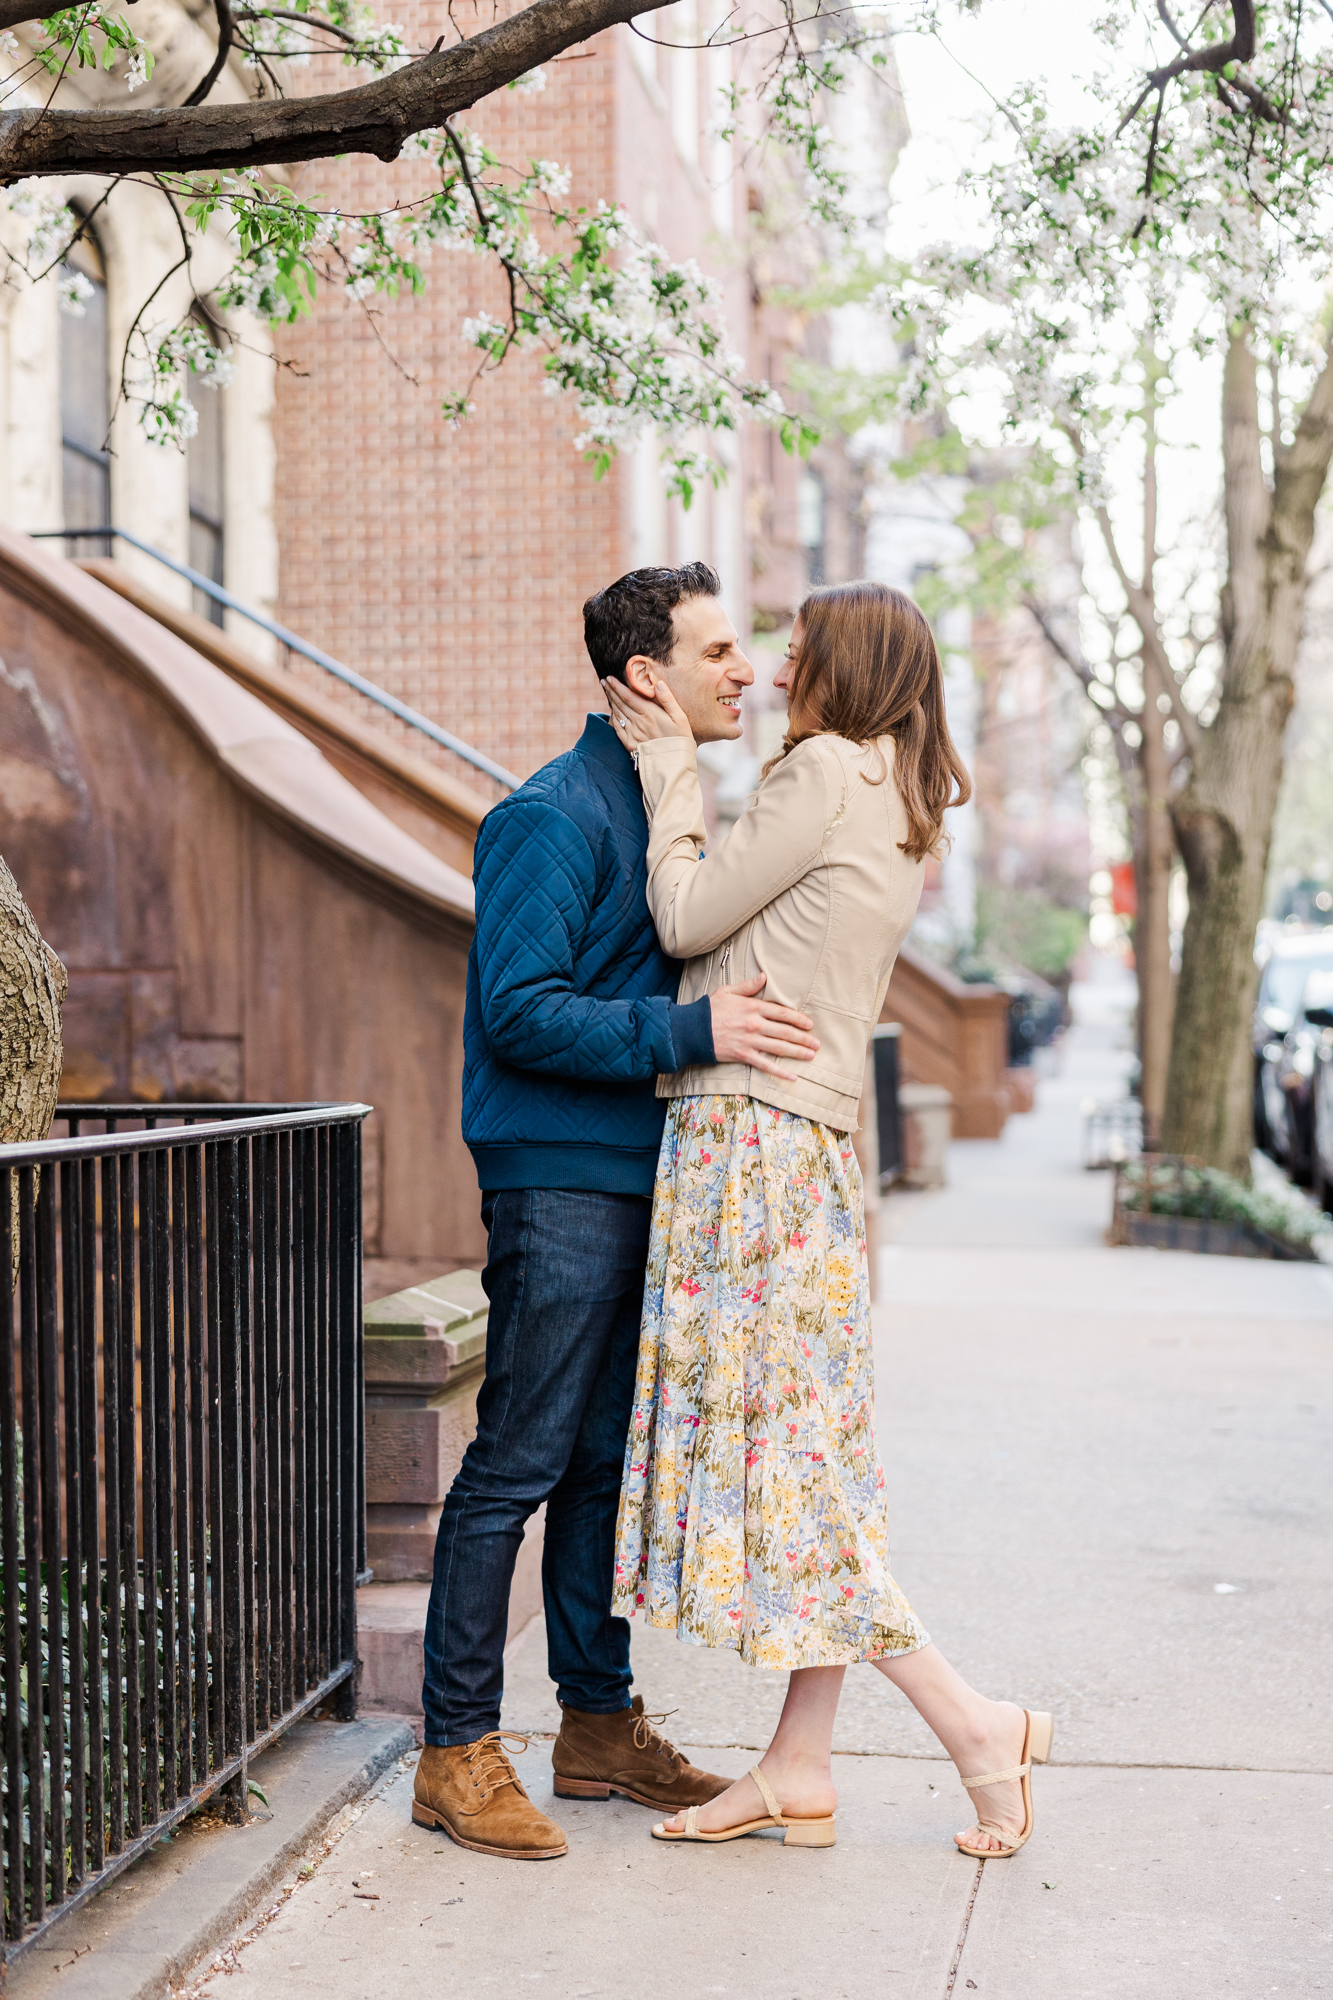 Pretty Upper East Side Engagement Photo Shoot in Spring